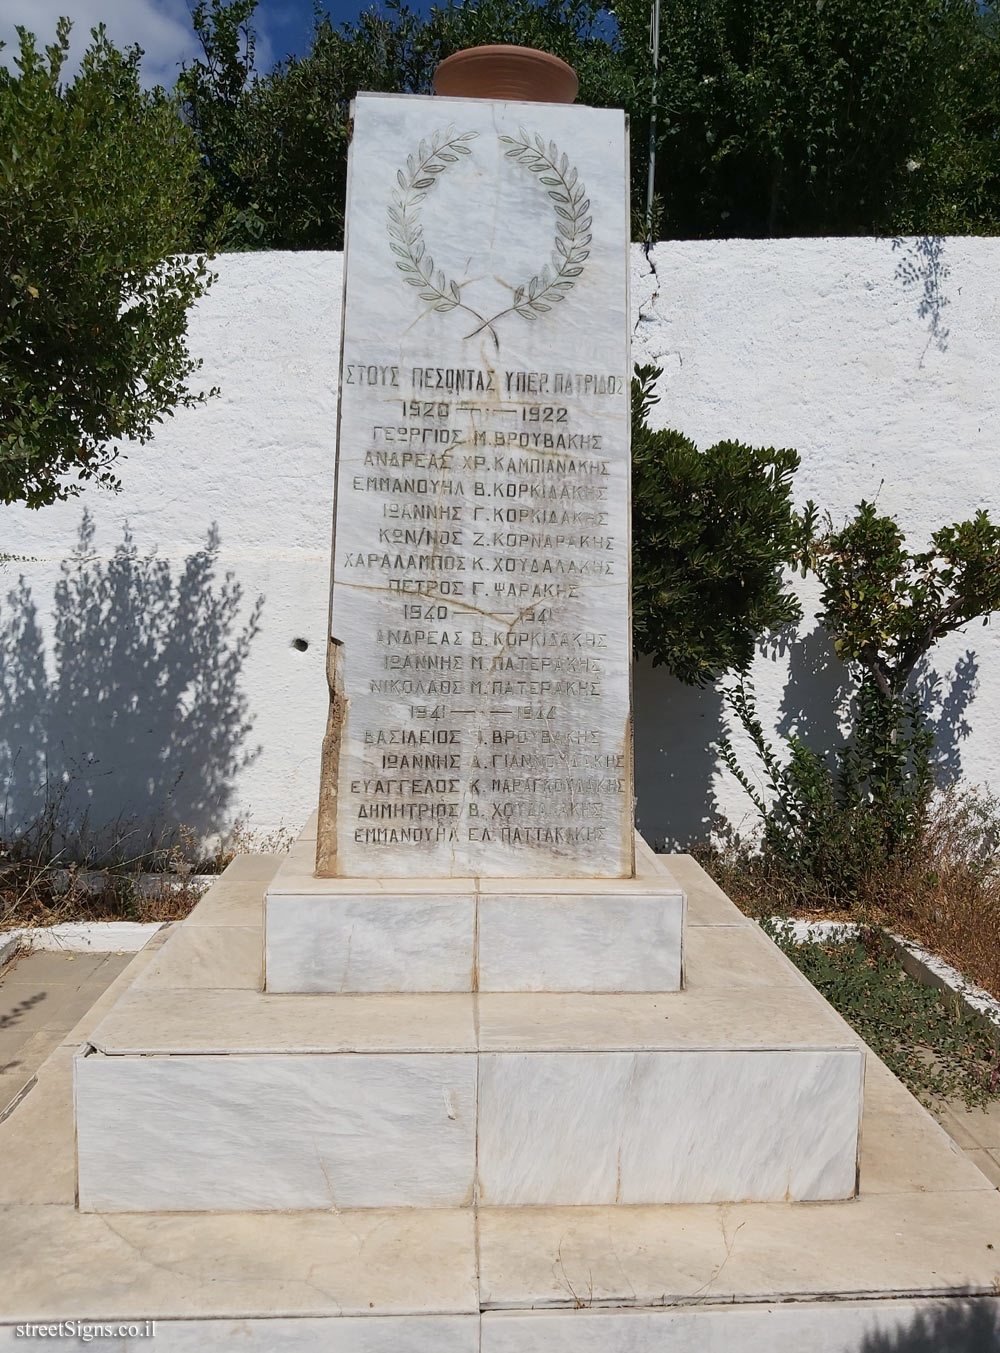 Voulgaro - A monument to the fallen in the Greco-Turkish War and World War II